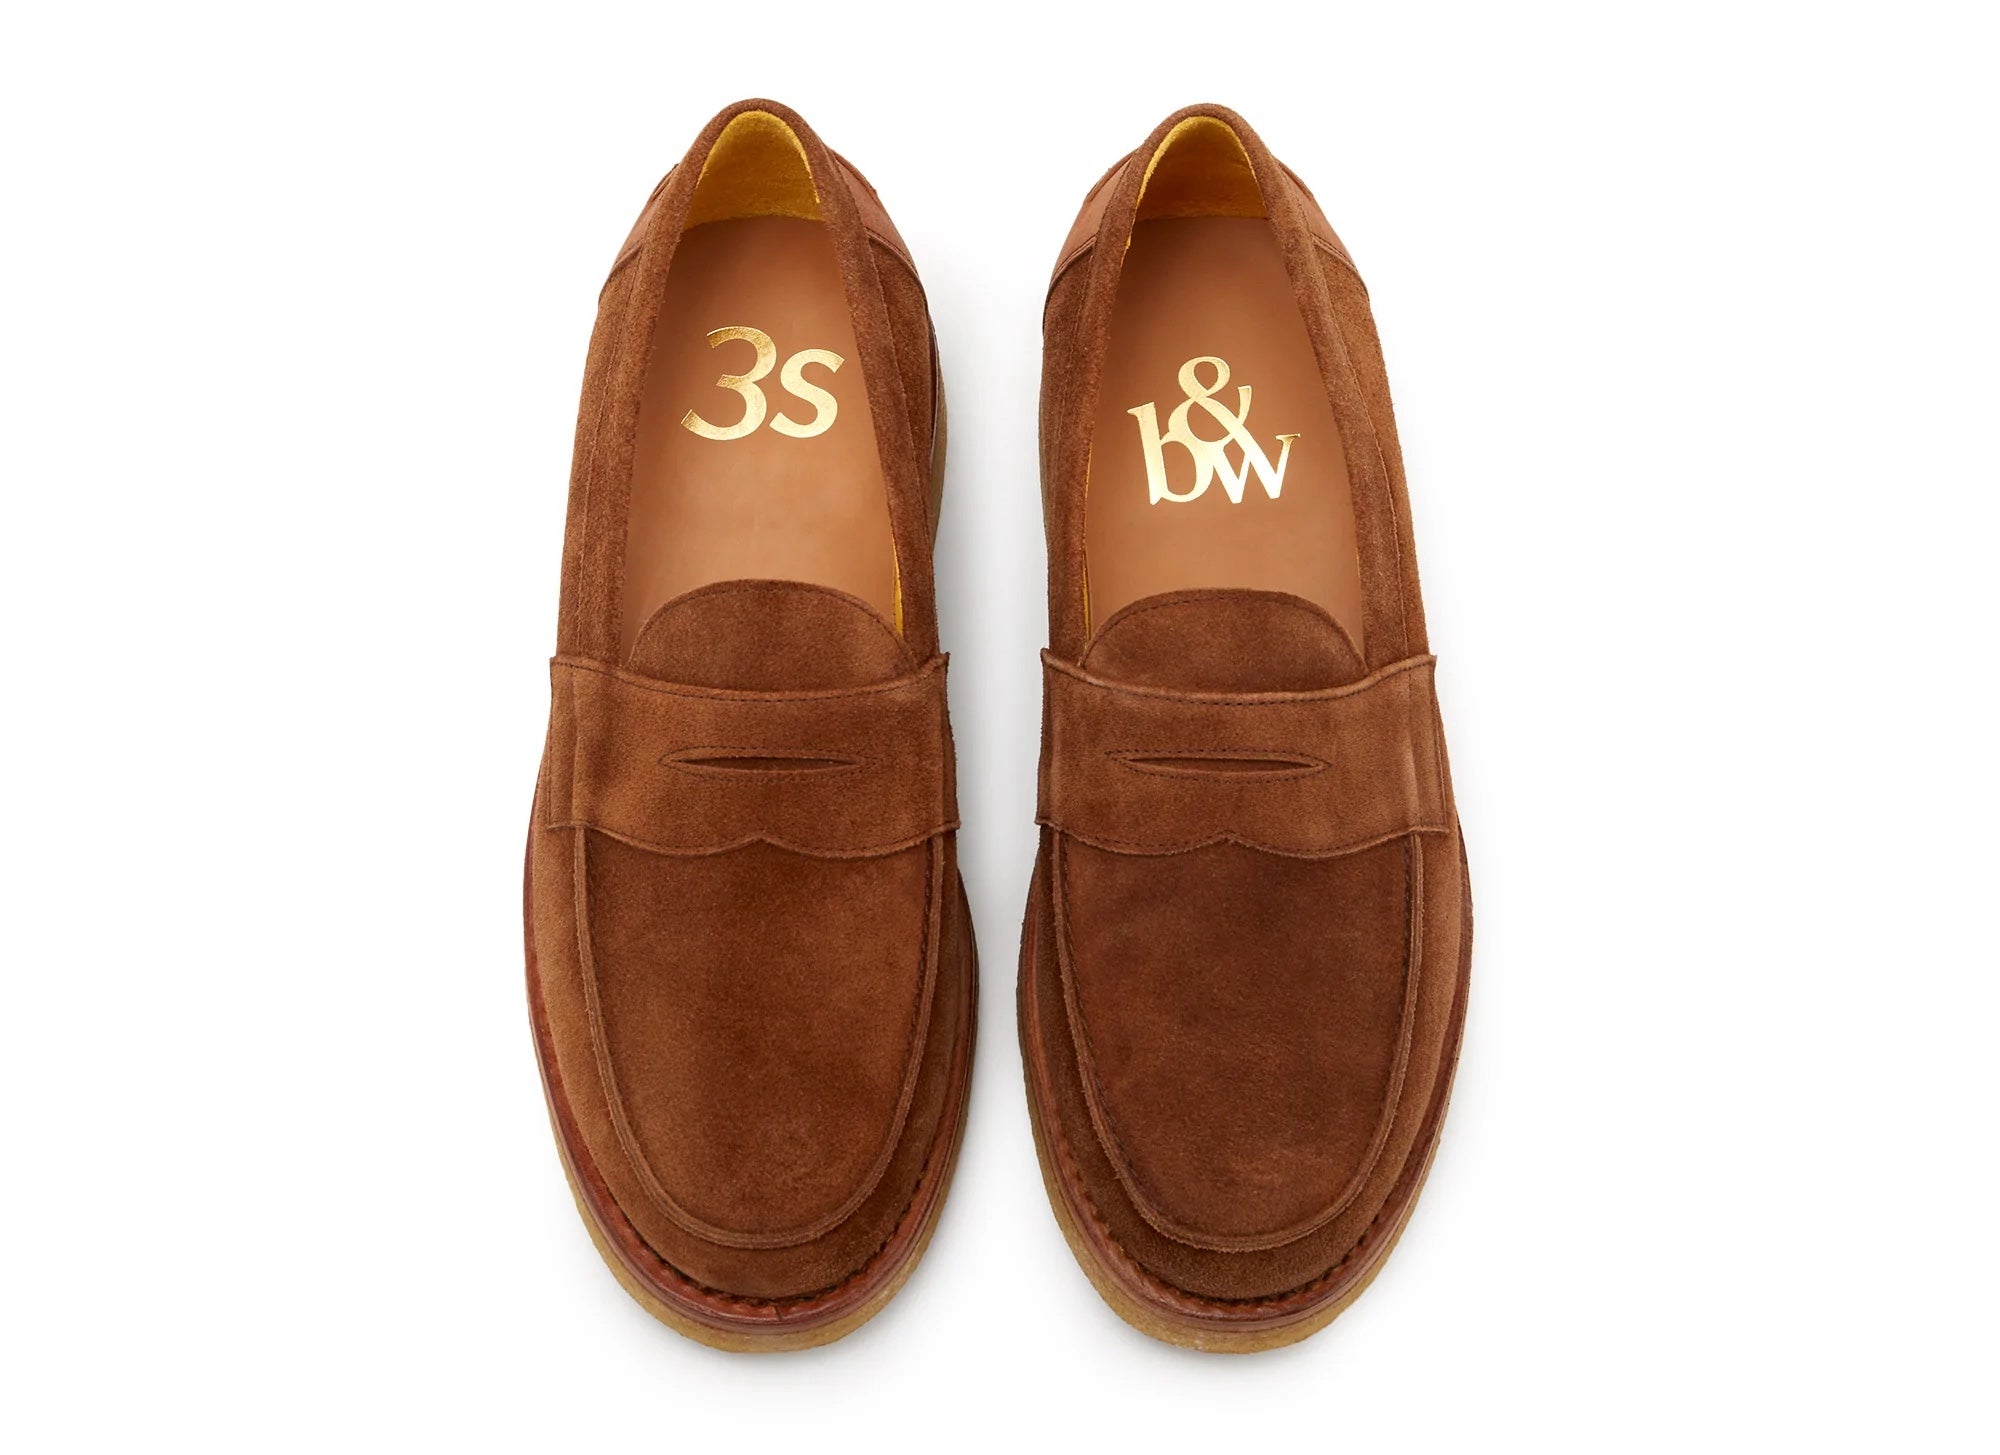 A pair of brown suede loafers on a white surface